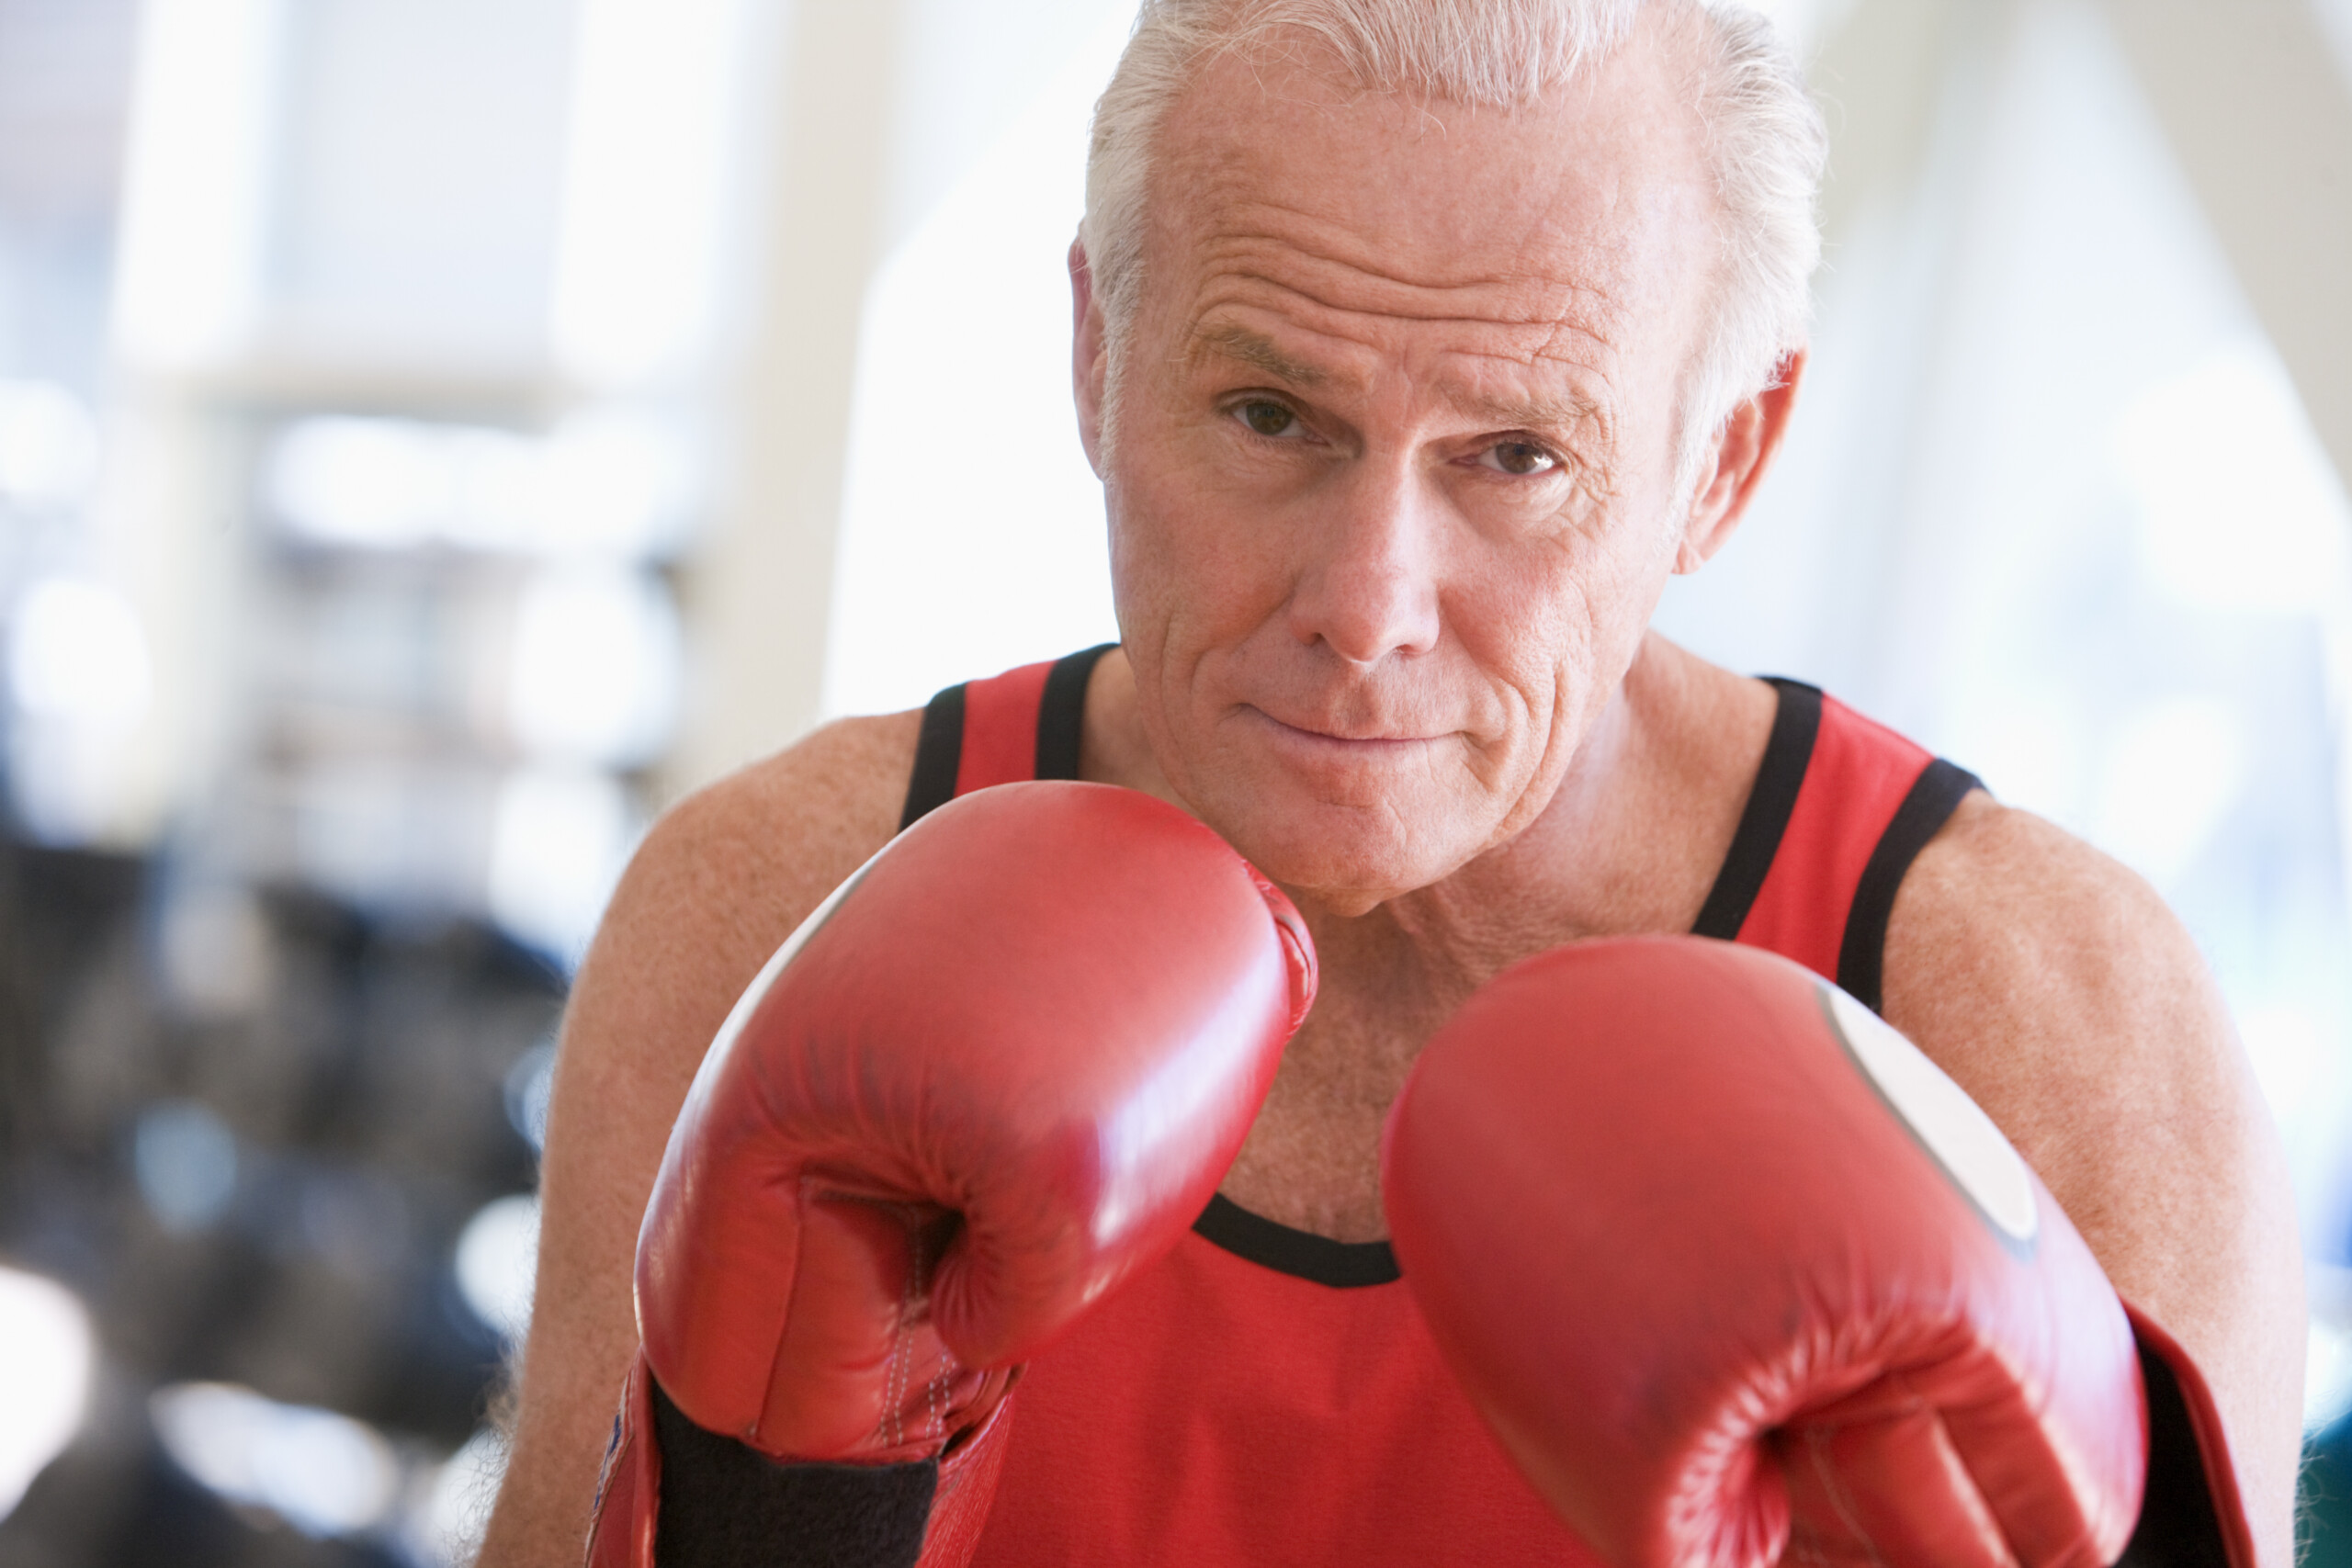 Aortic Aneurysm: Are Heavy Bag Workouts Safe?